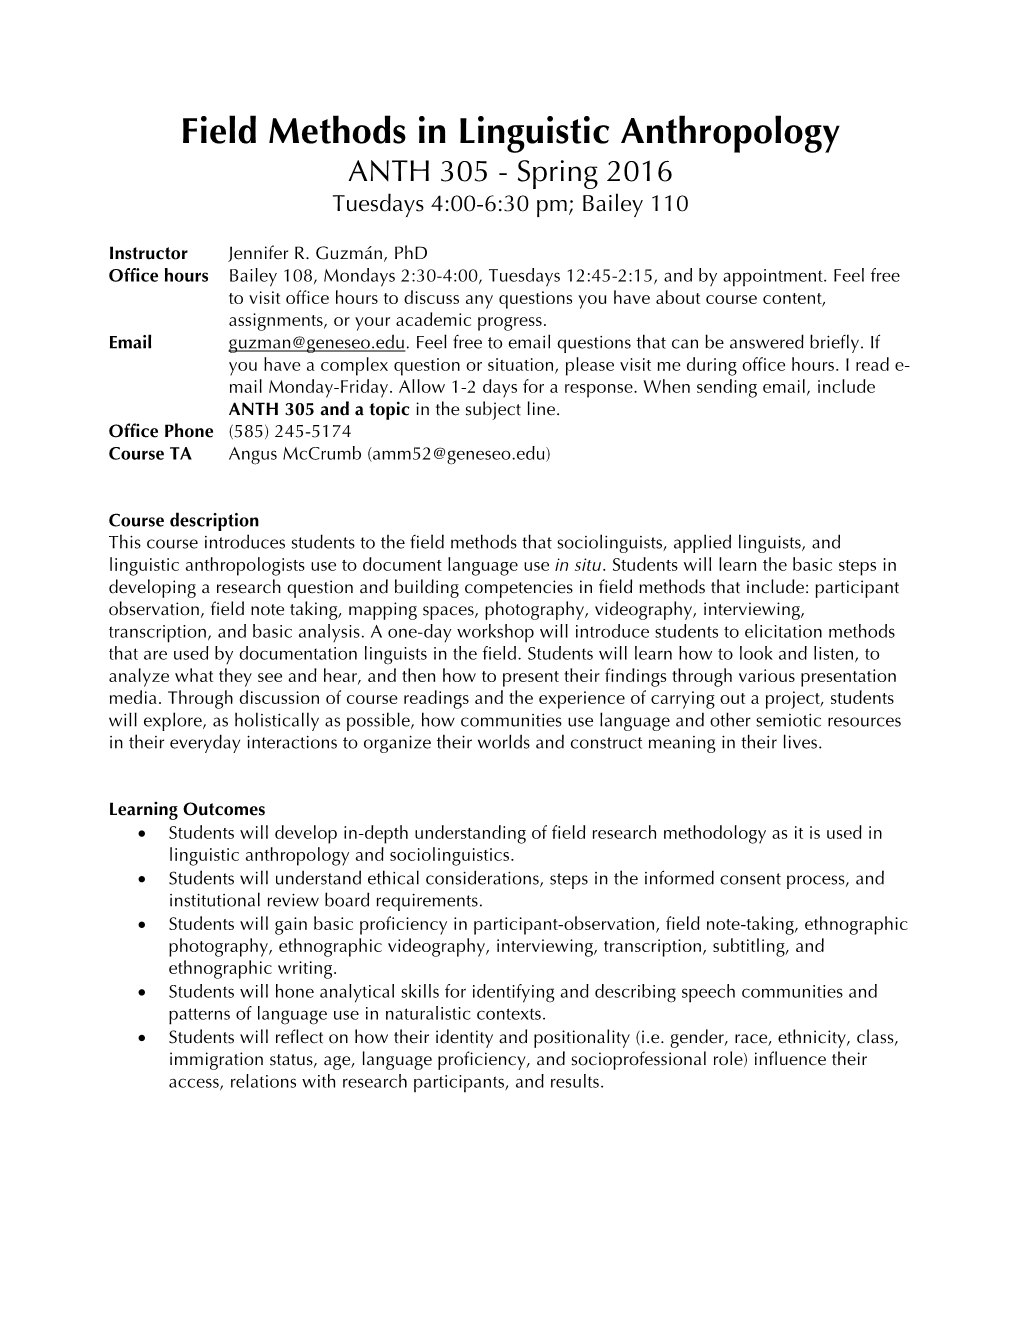 Field Methods in Linguistic Anthropology ANTH 305 - Spring 2016 Tuesdays 4:00-6:30 Pm; Bailey 110